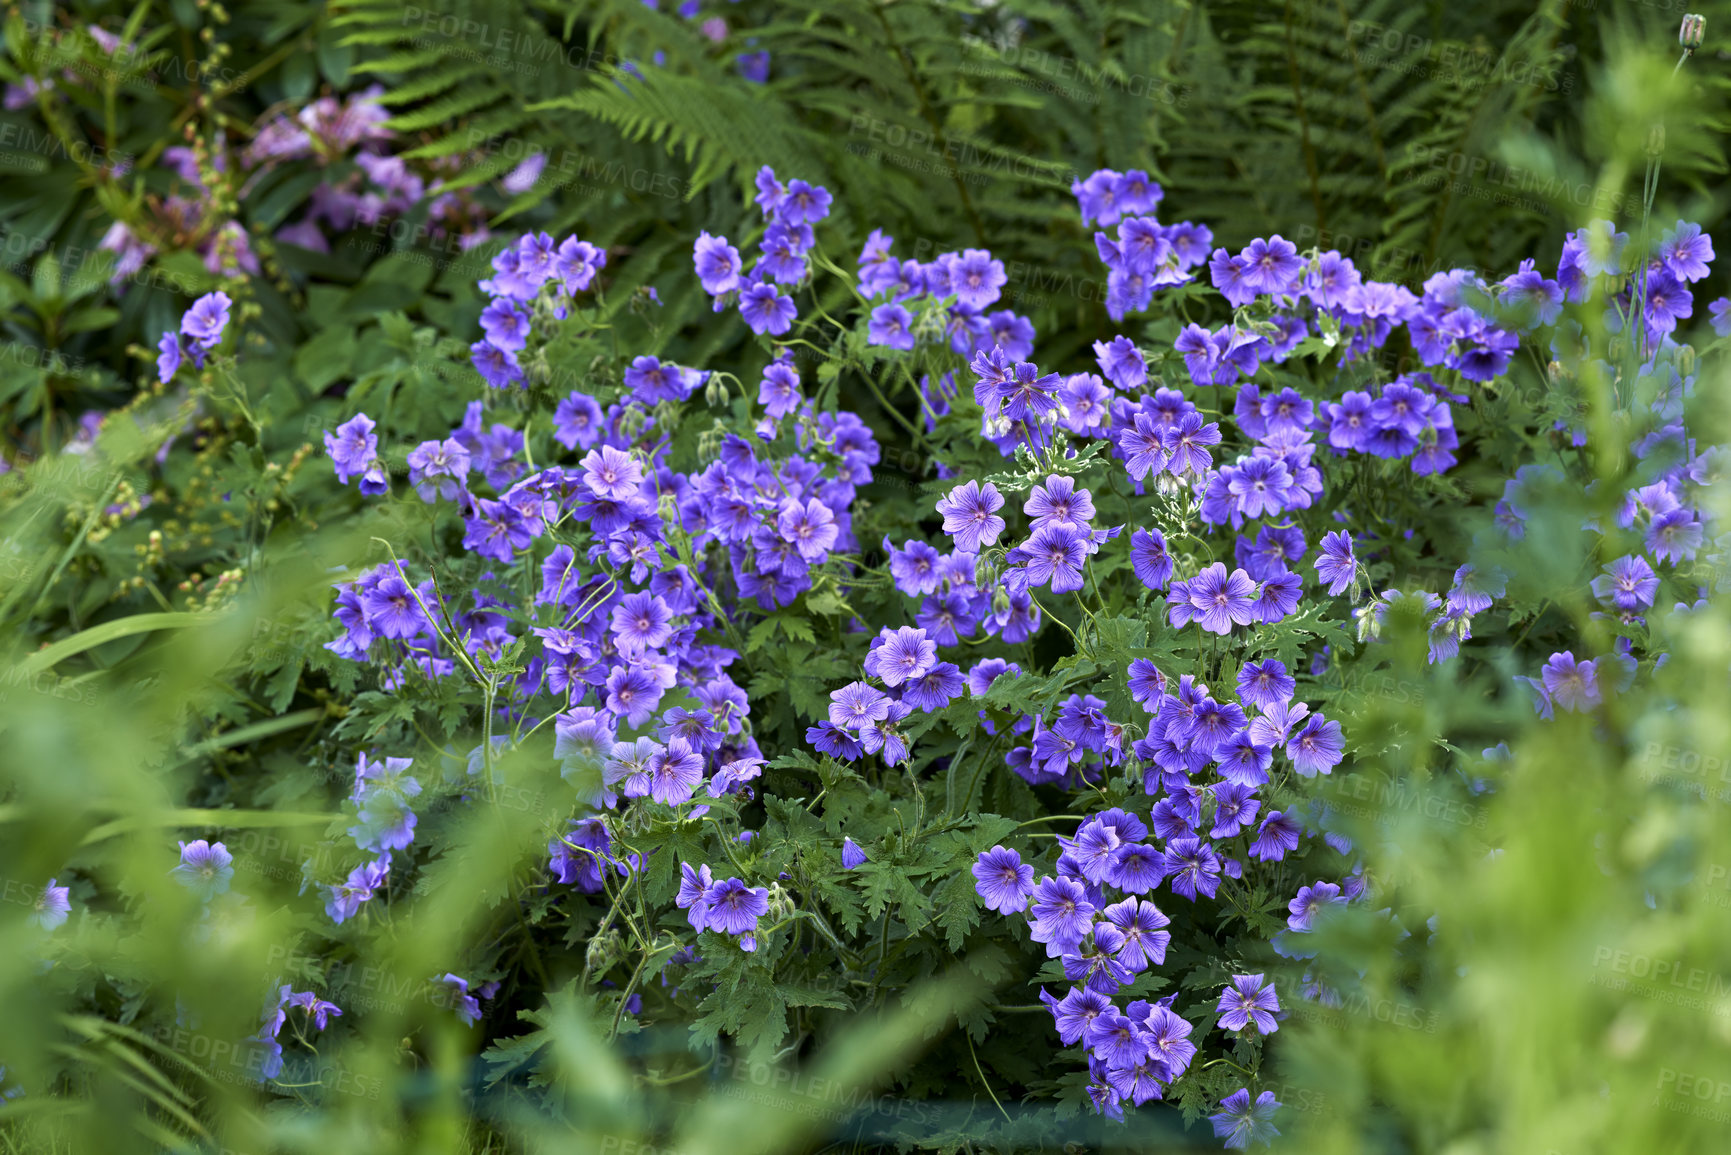 Buy stock photo Meadow geranium flowers growing in a green forest in summer. Purple plants blooming in a lush botanical garden in spring. Beautiful violet flowering plants budding in its natural environment